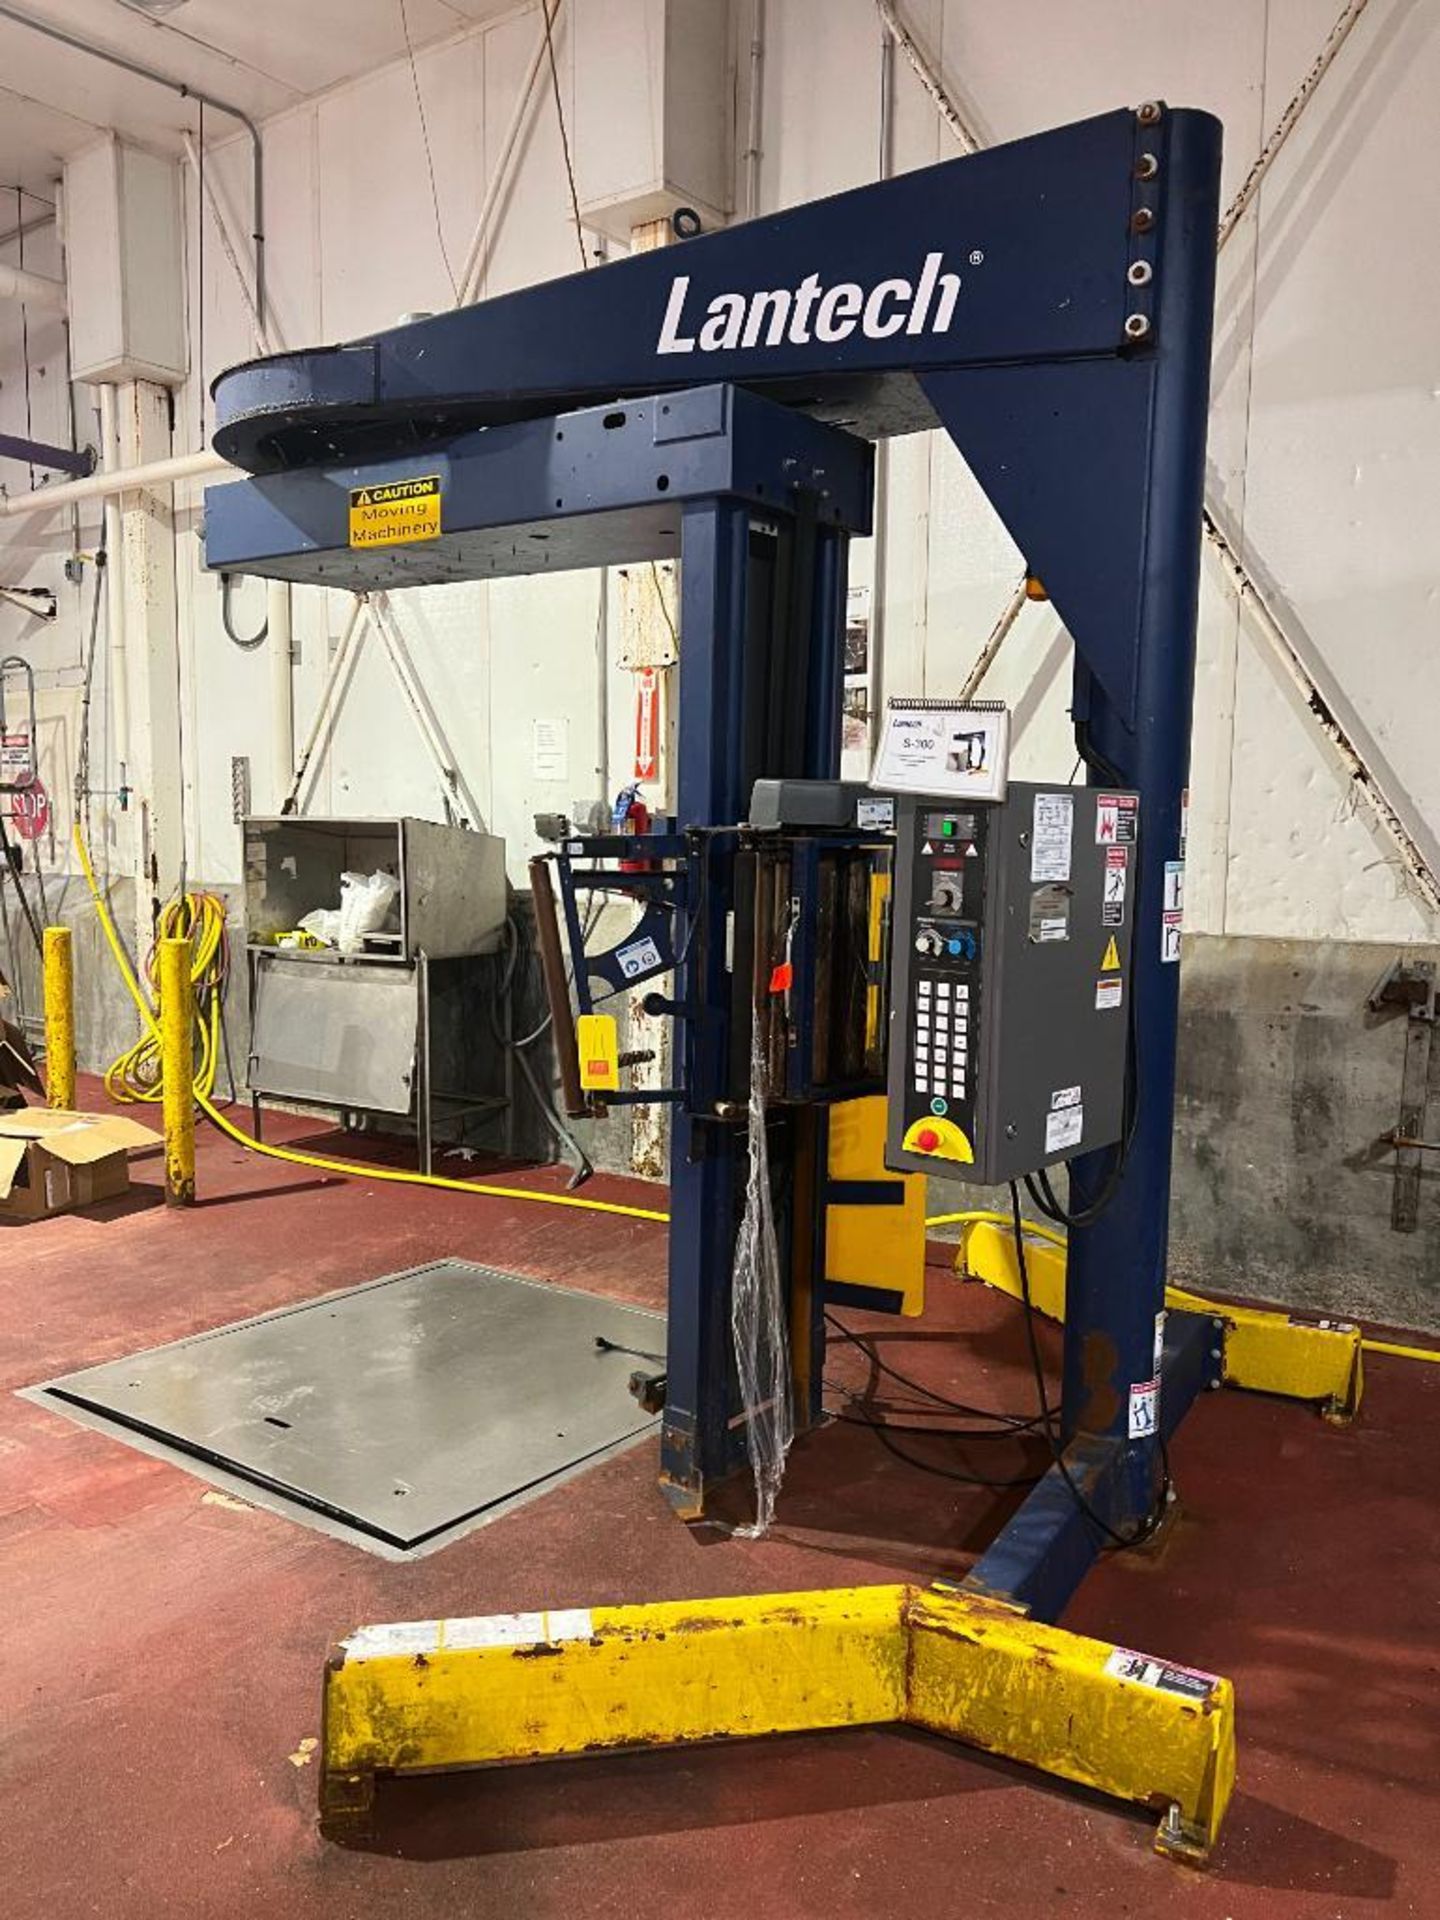 2017 Lantech Stretch Wrapper, Model: S-300 with In-Floor Scale (Subject to Confirmation) - Rigging F